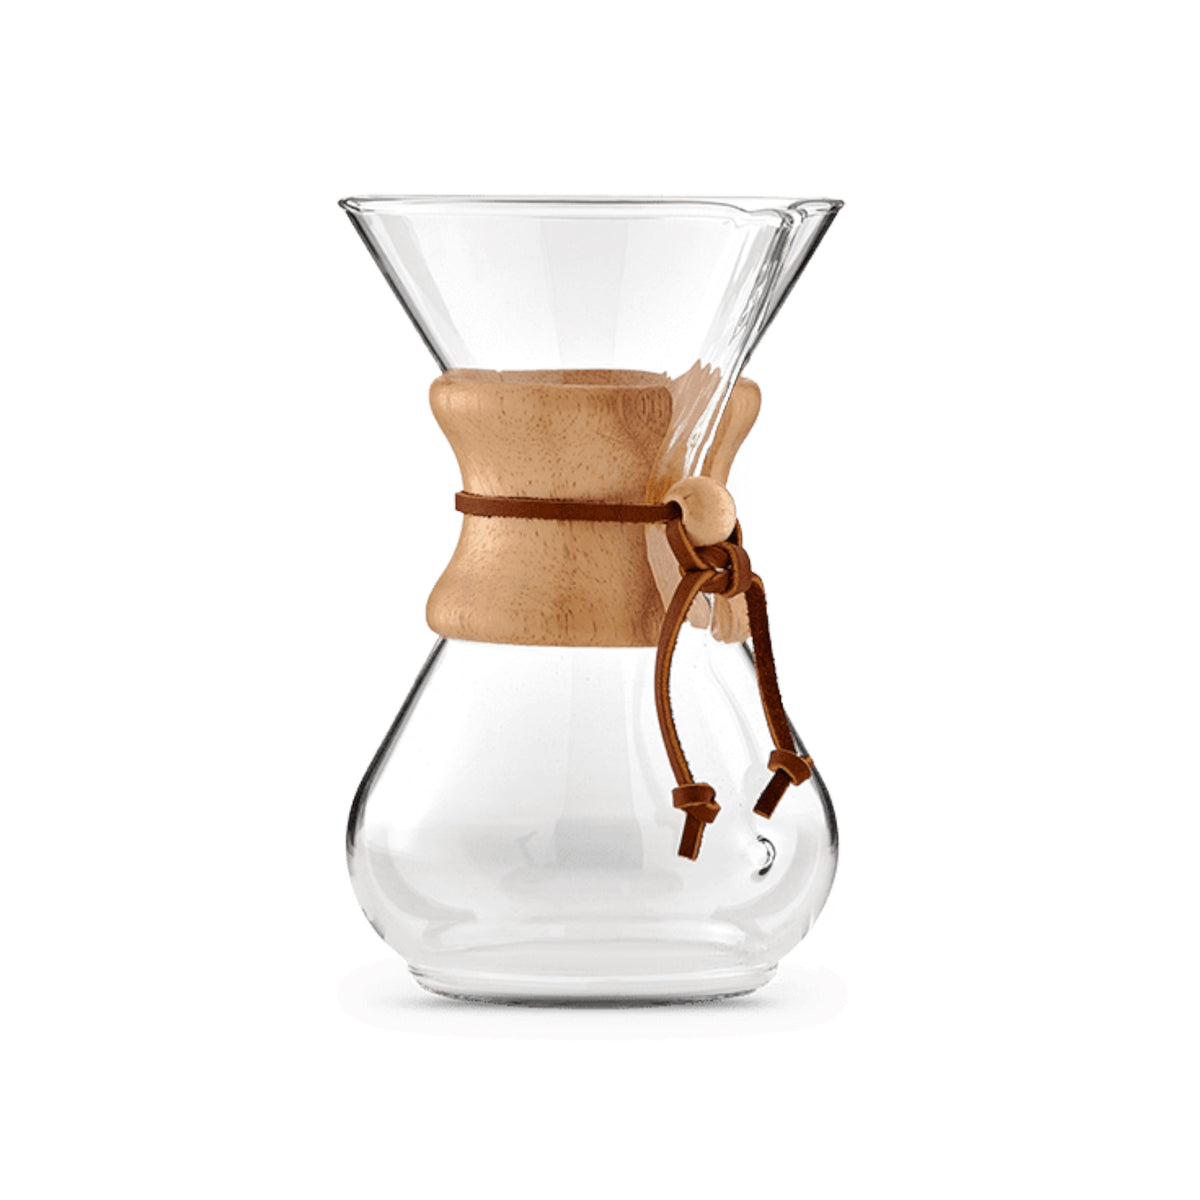 How to Use a Chemex Coffee Maker in 9 (Surprisingly Easy) Steps